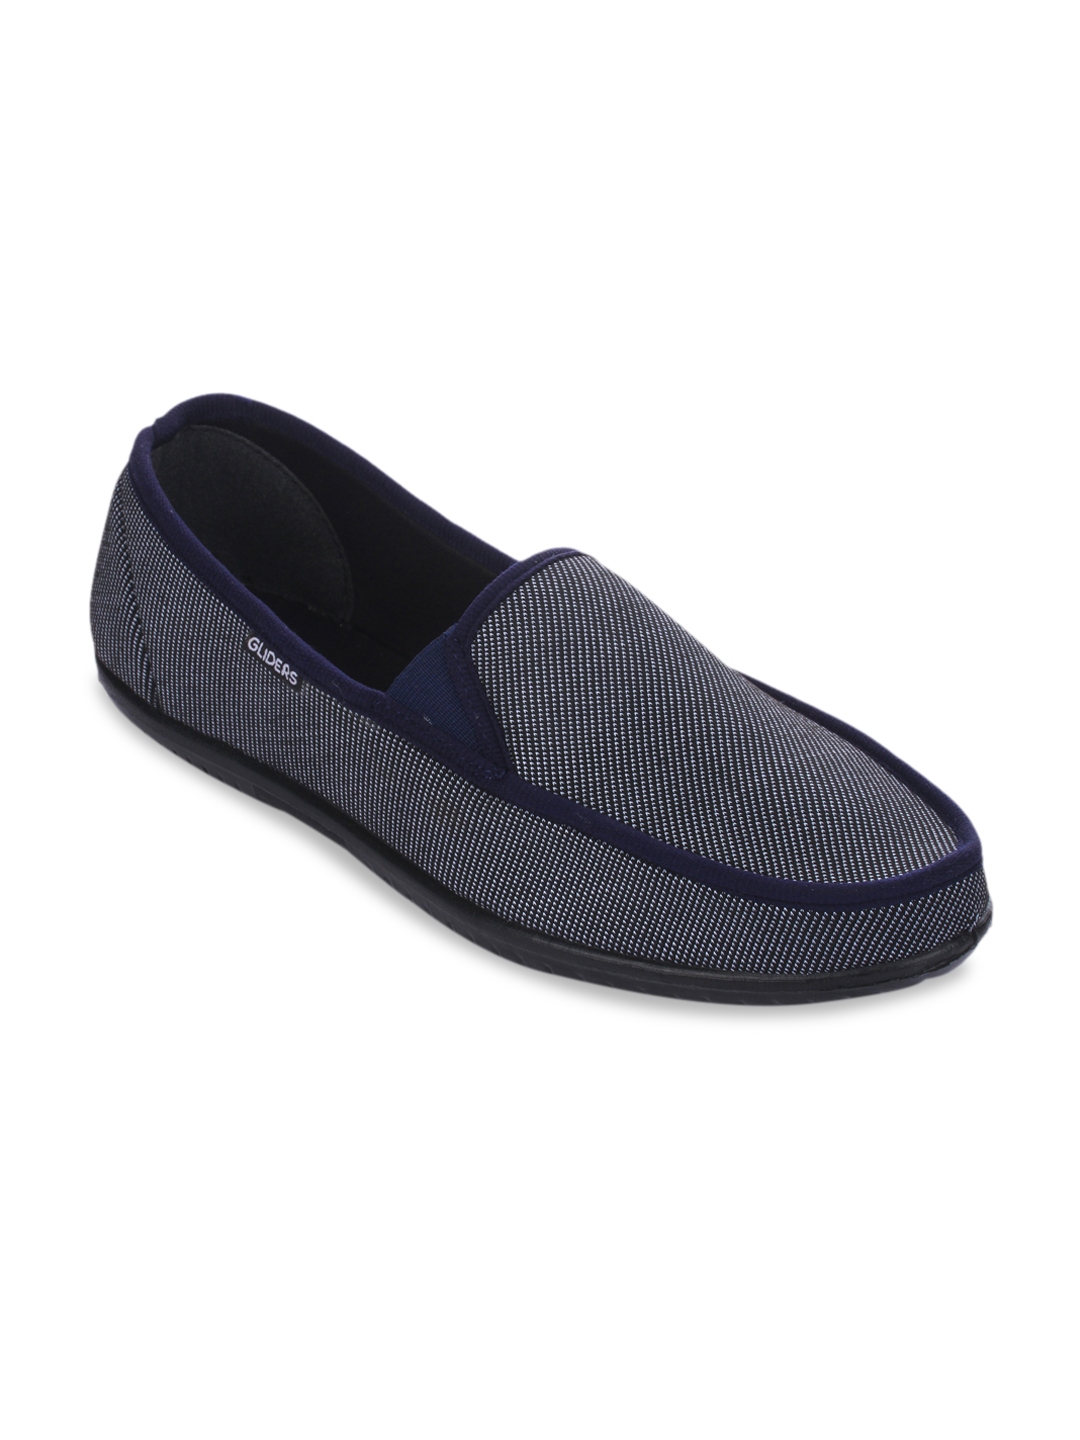 Buy Gliders Men Navy Blue Slip On Sneakers - Casual Shoes for Men ...